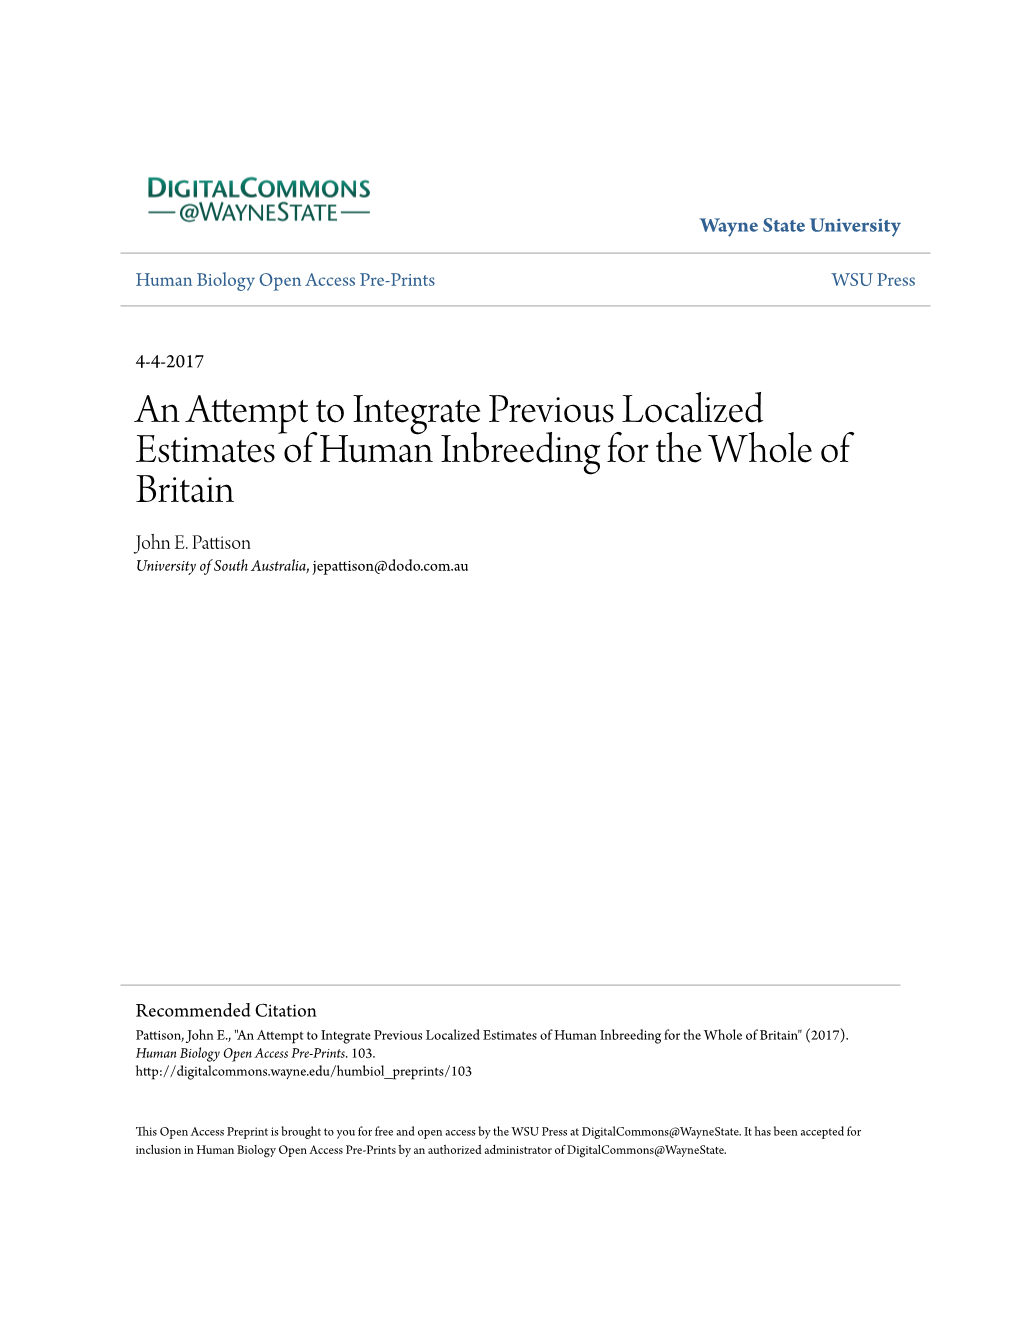 An Attempt to Integrate Previous Localized Estimates of Human Inbreeding for the Whole of Britain John E